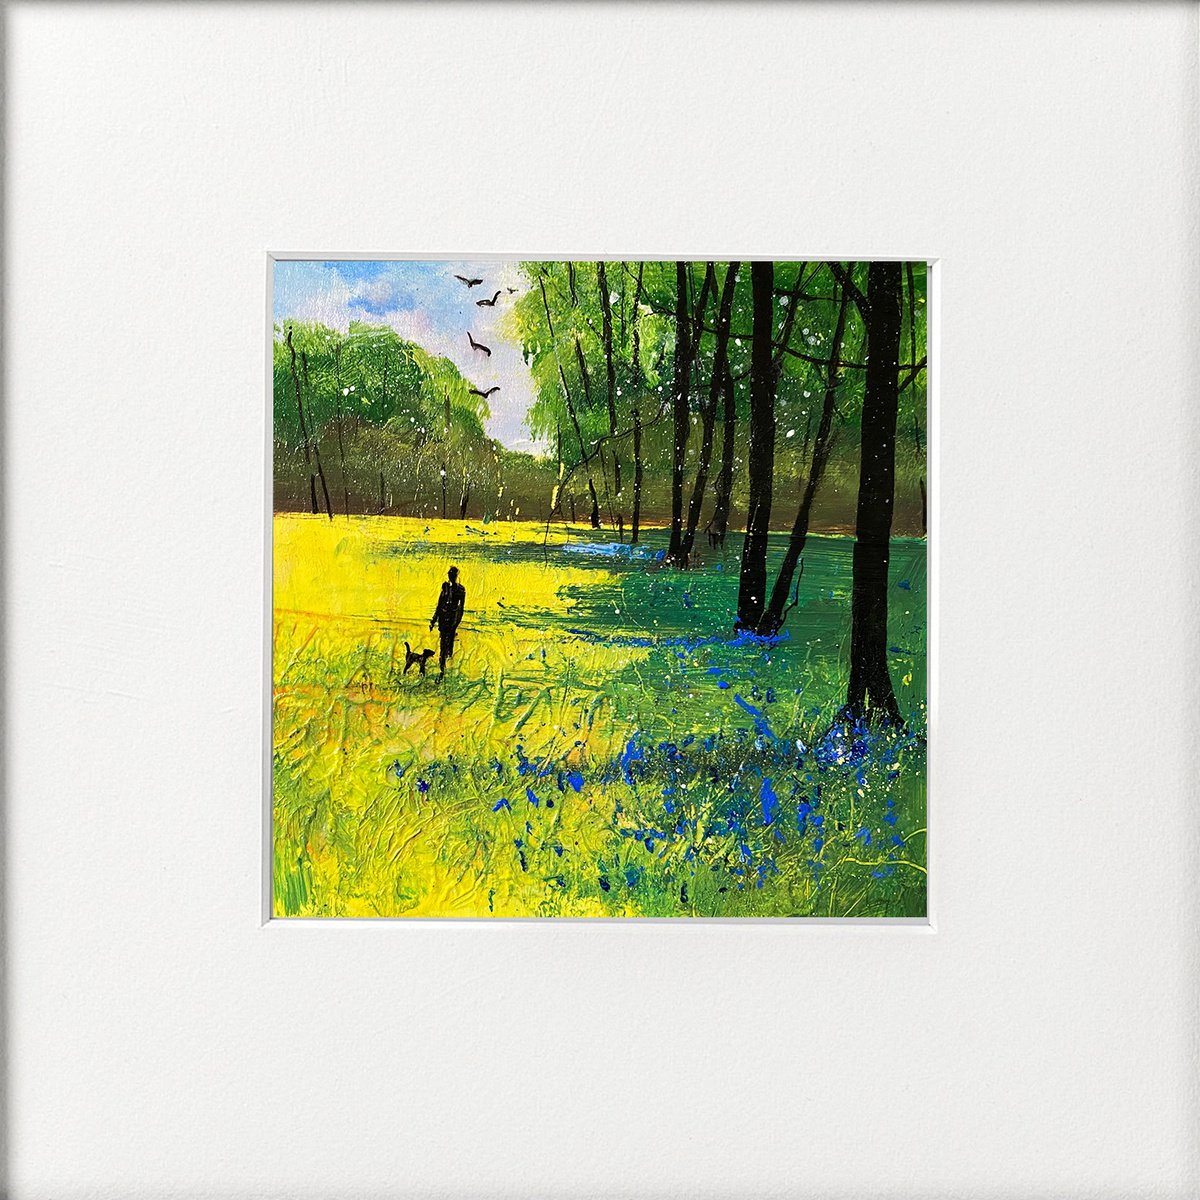 Seasons - Early Summer last of bluebells Stroll with dog by Teresa Tanner